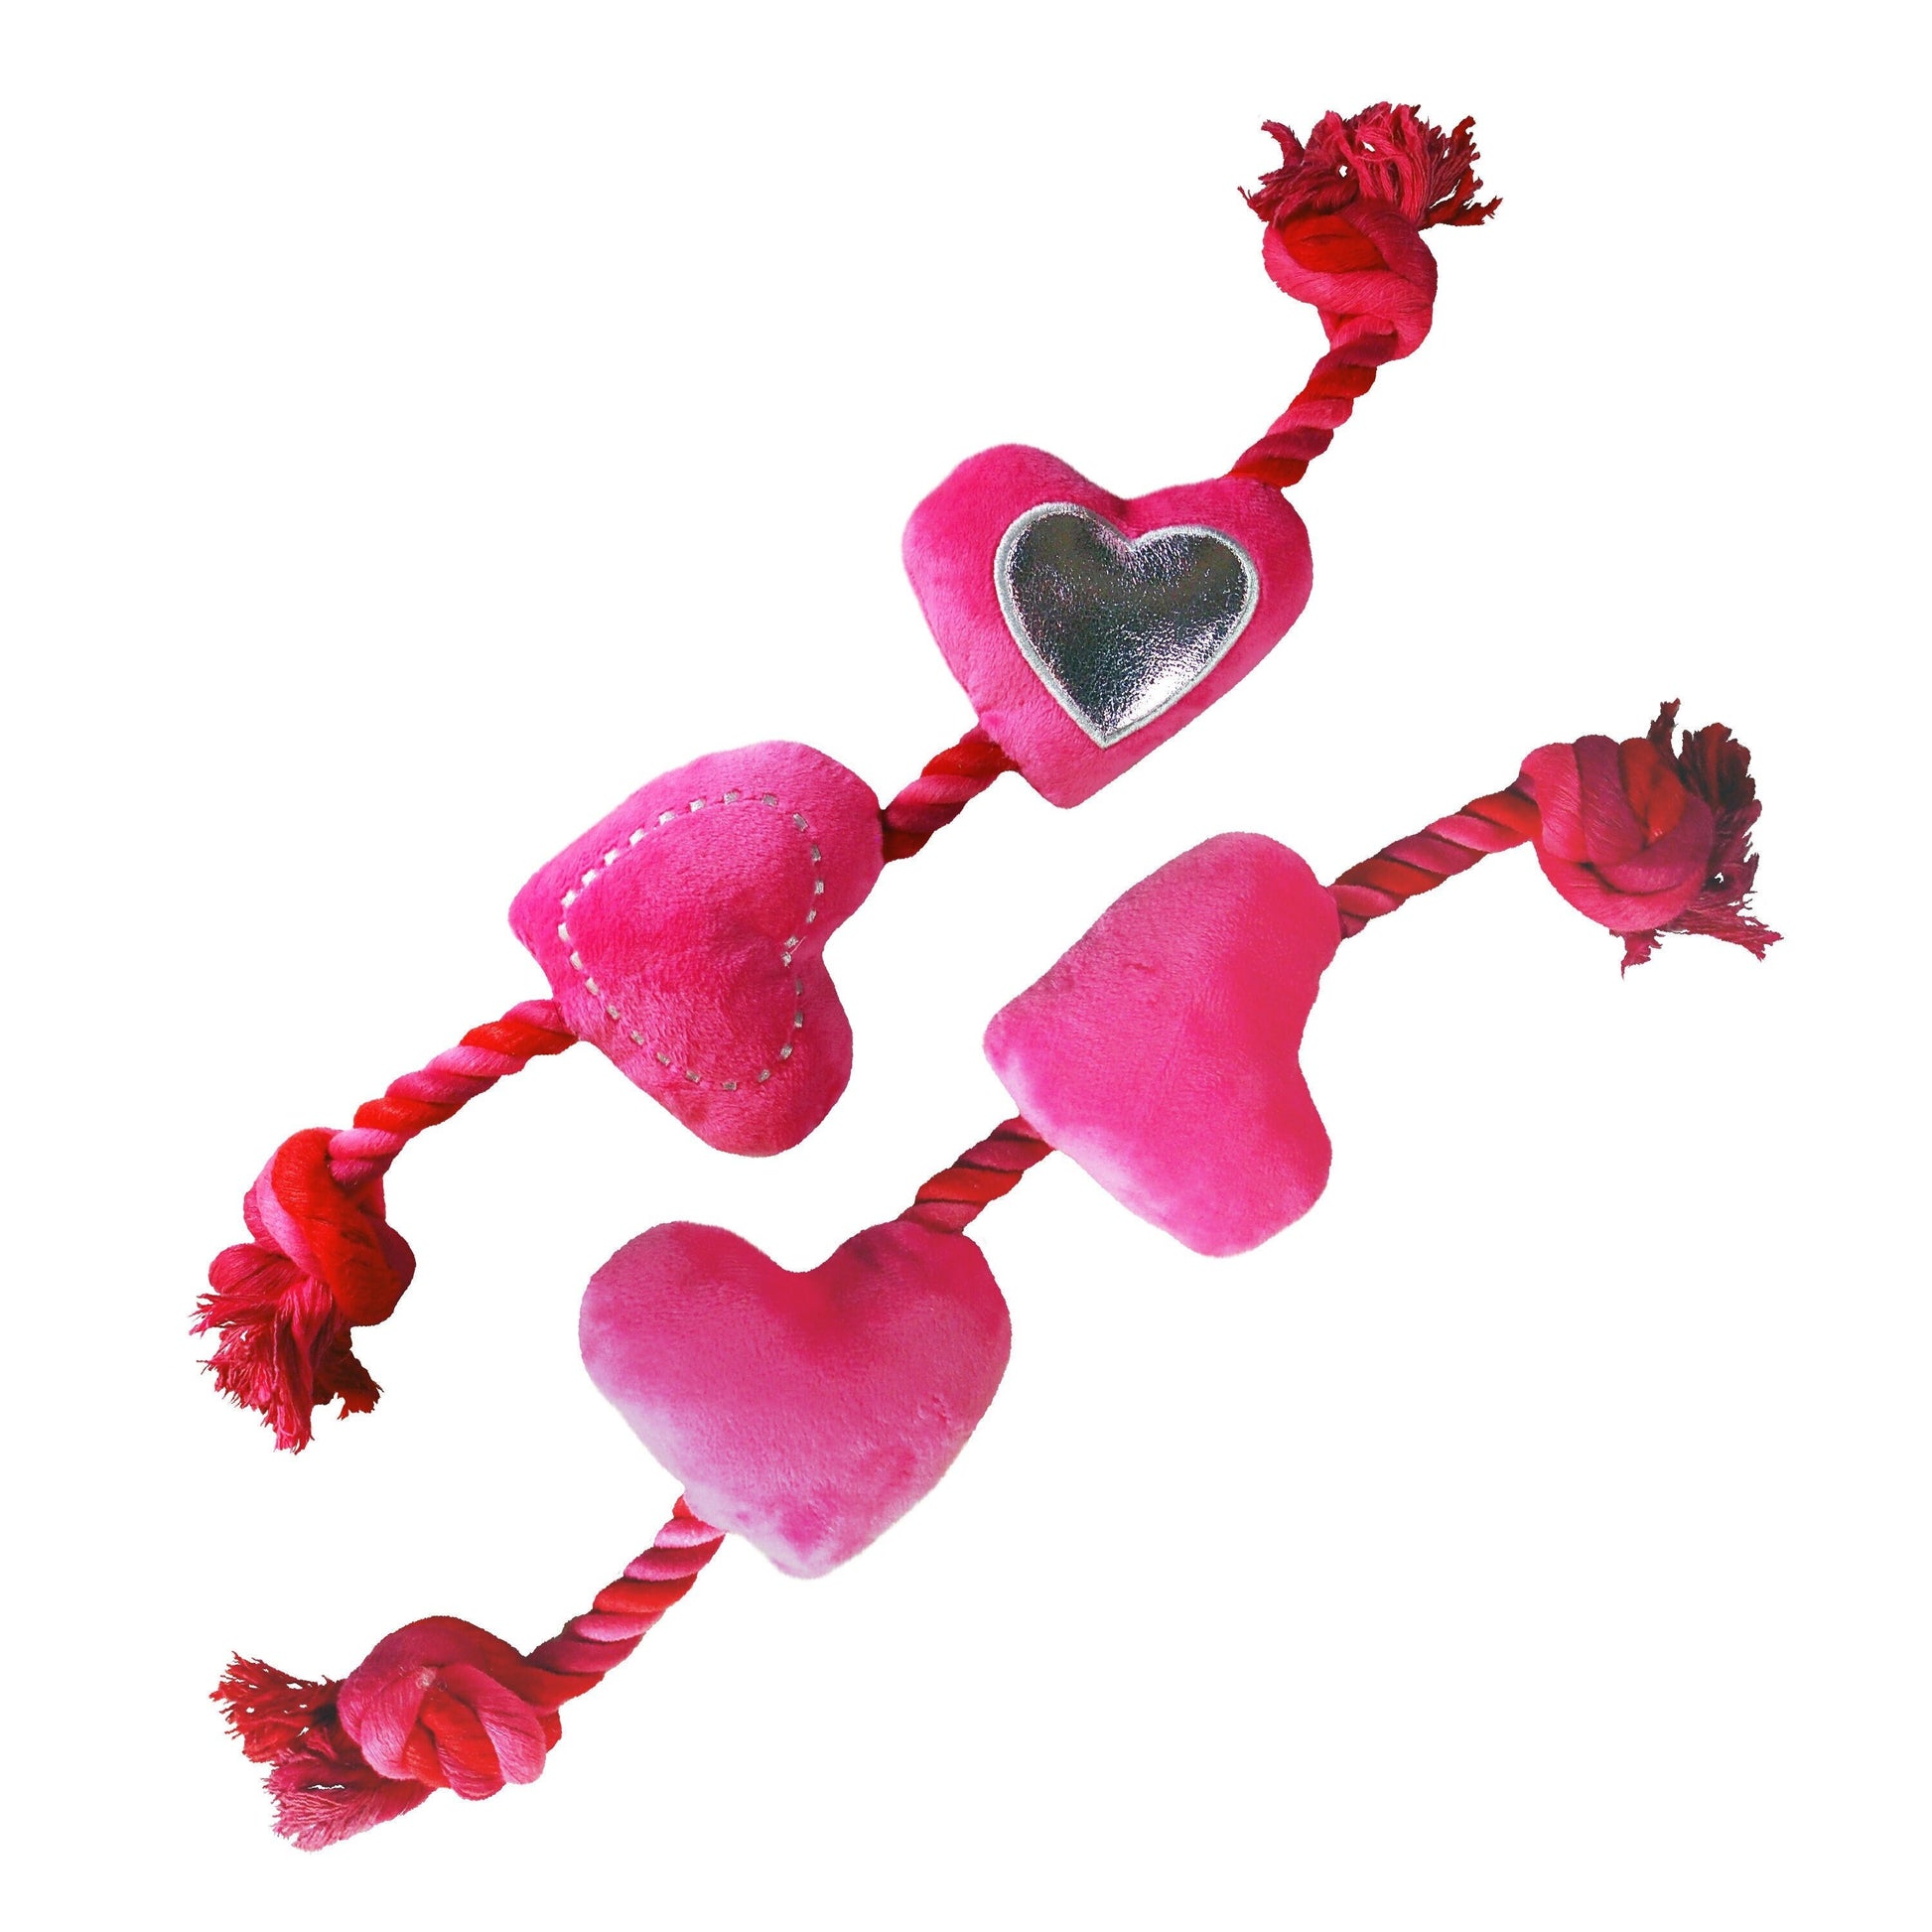 Dog Toy : Braided Rope and Small Plush Hearts hot pink silver - tug plaything - LEAGUE OF CRAFTY CANINES